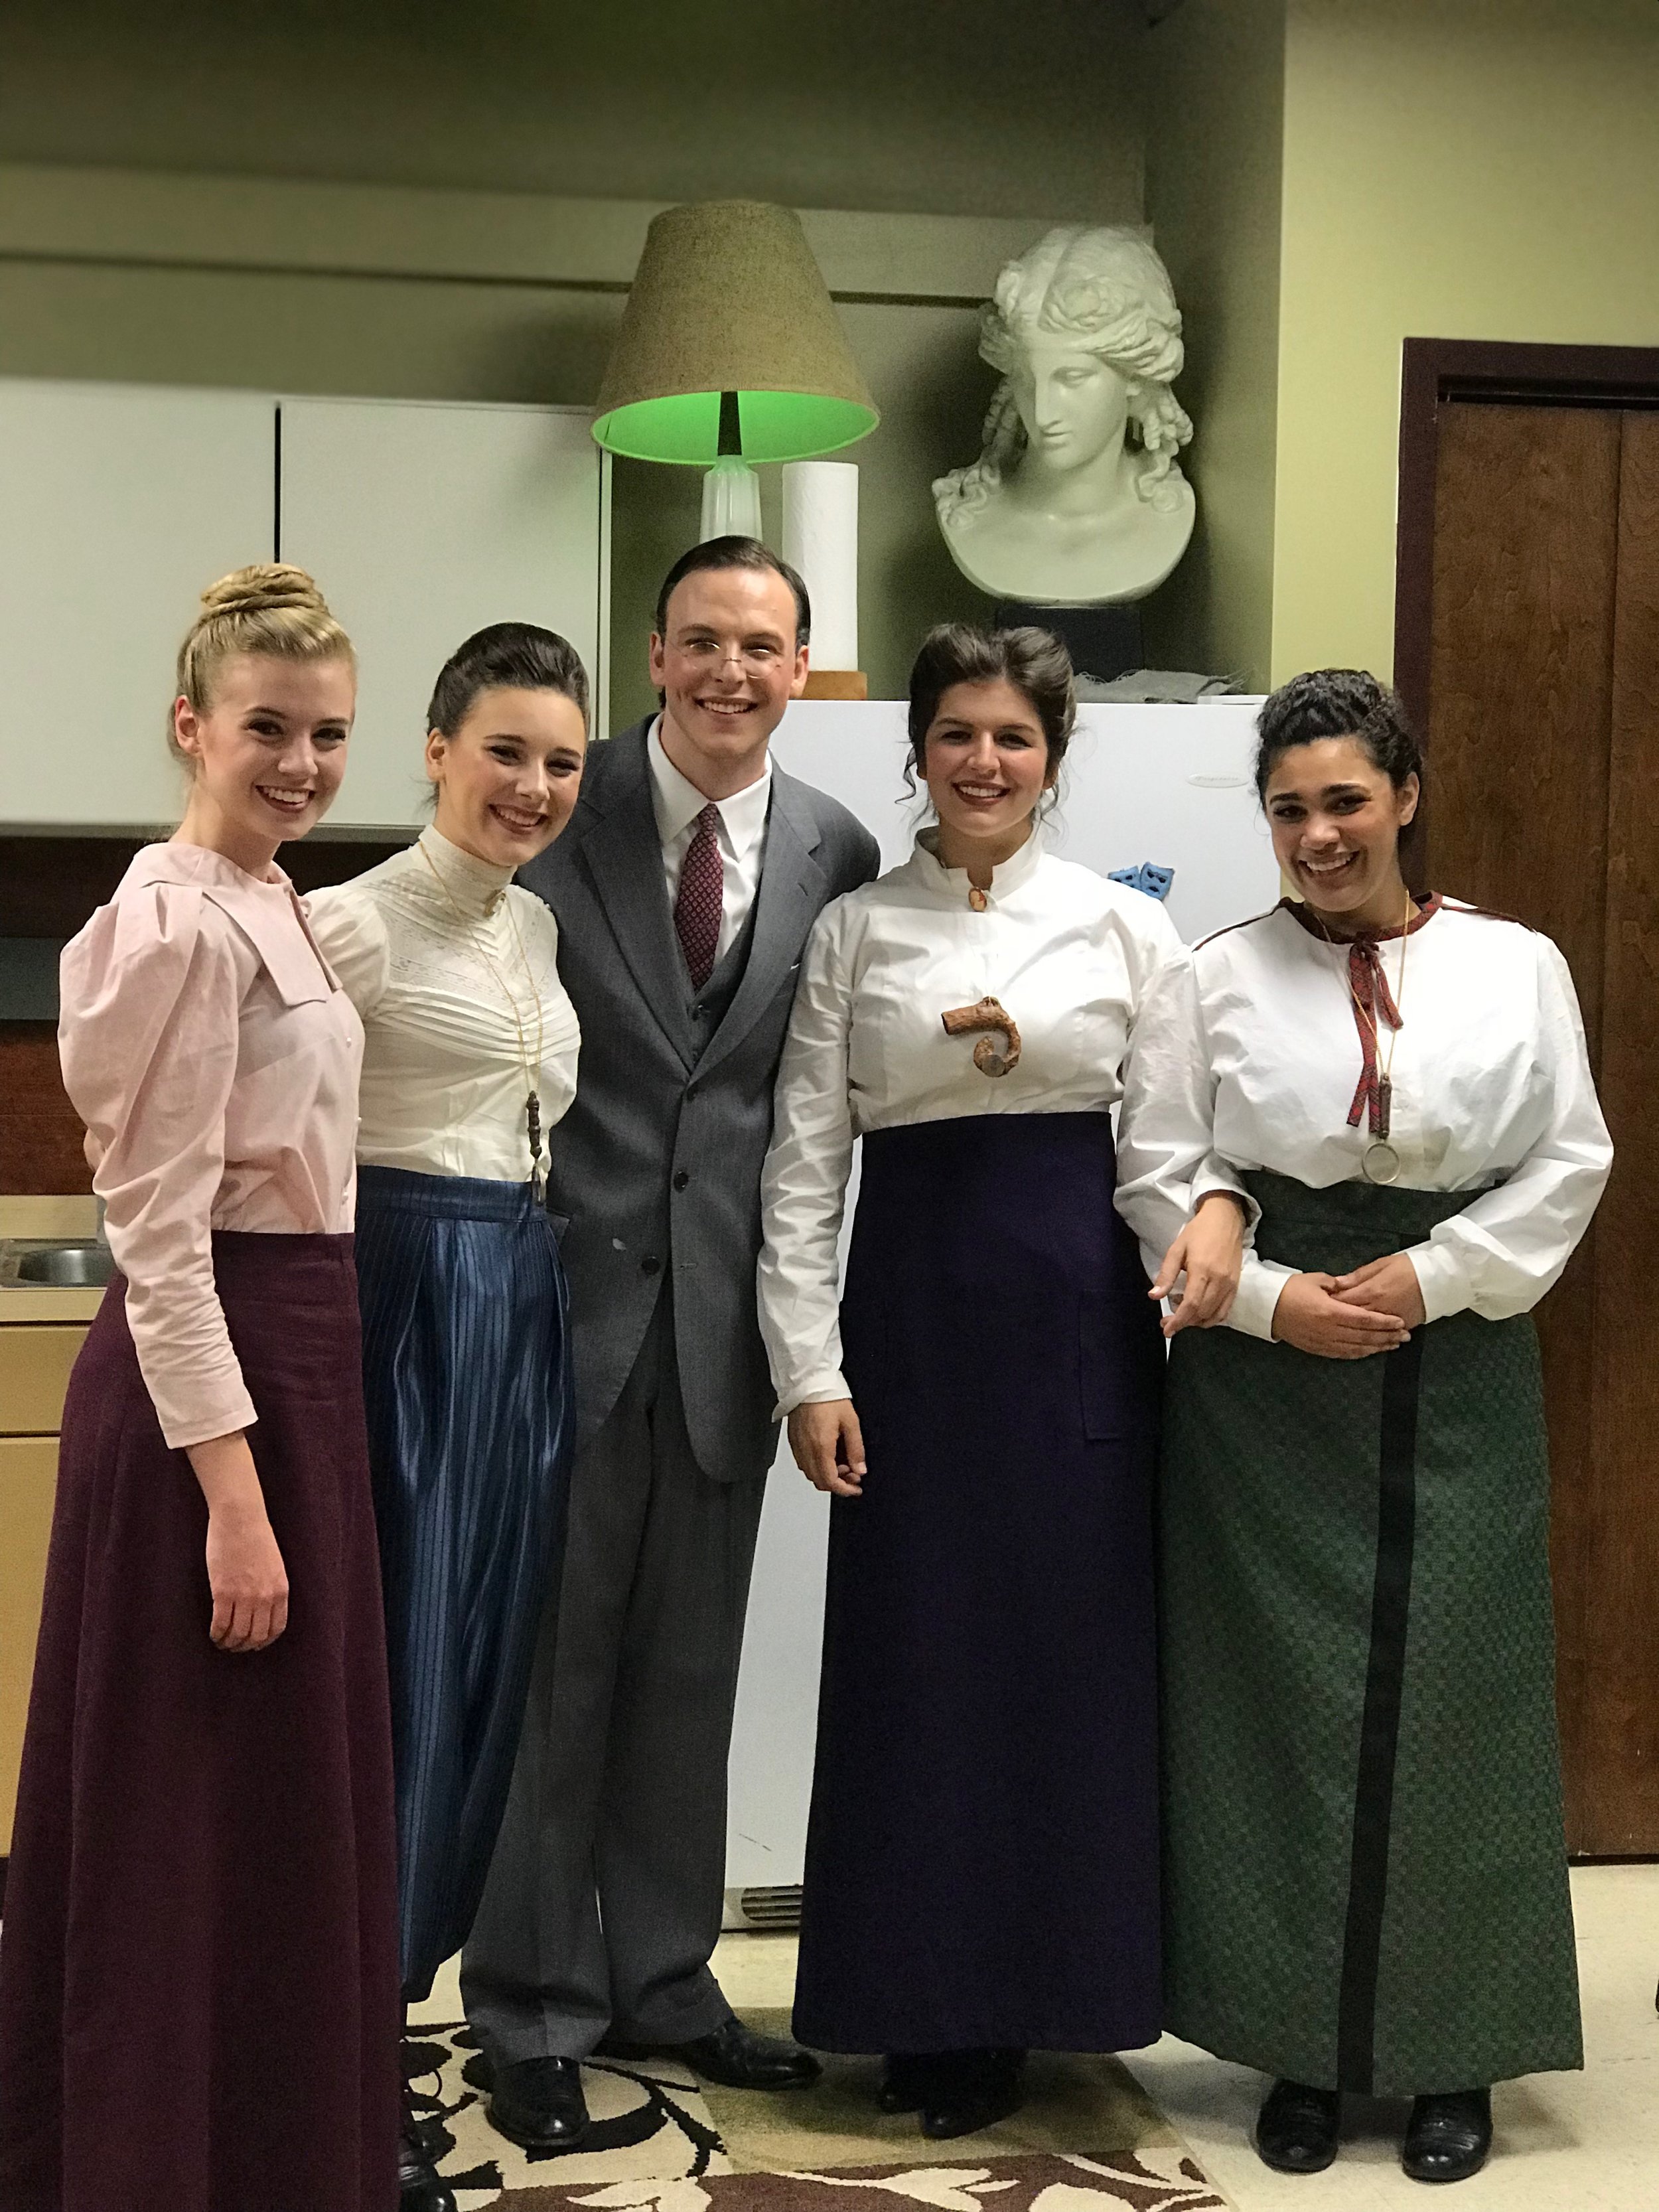 The cast members paused from dressing out of their costumes to pose for a group photo after the play.From left to right: Abby Gilbert (sophomore), Rachel Gasdia (sophomore), Tanner Dean (junior), Emily Smith (senior) and Cassie Scott (senior).